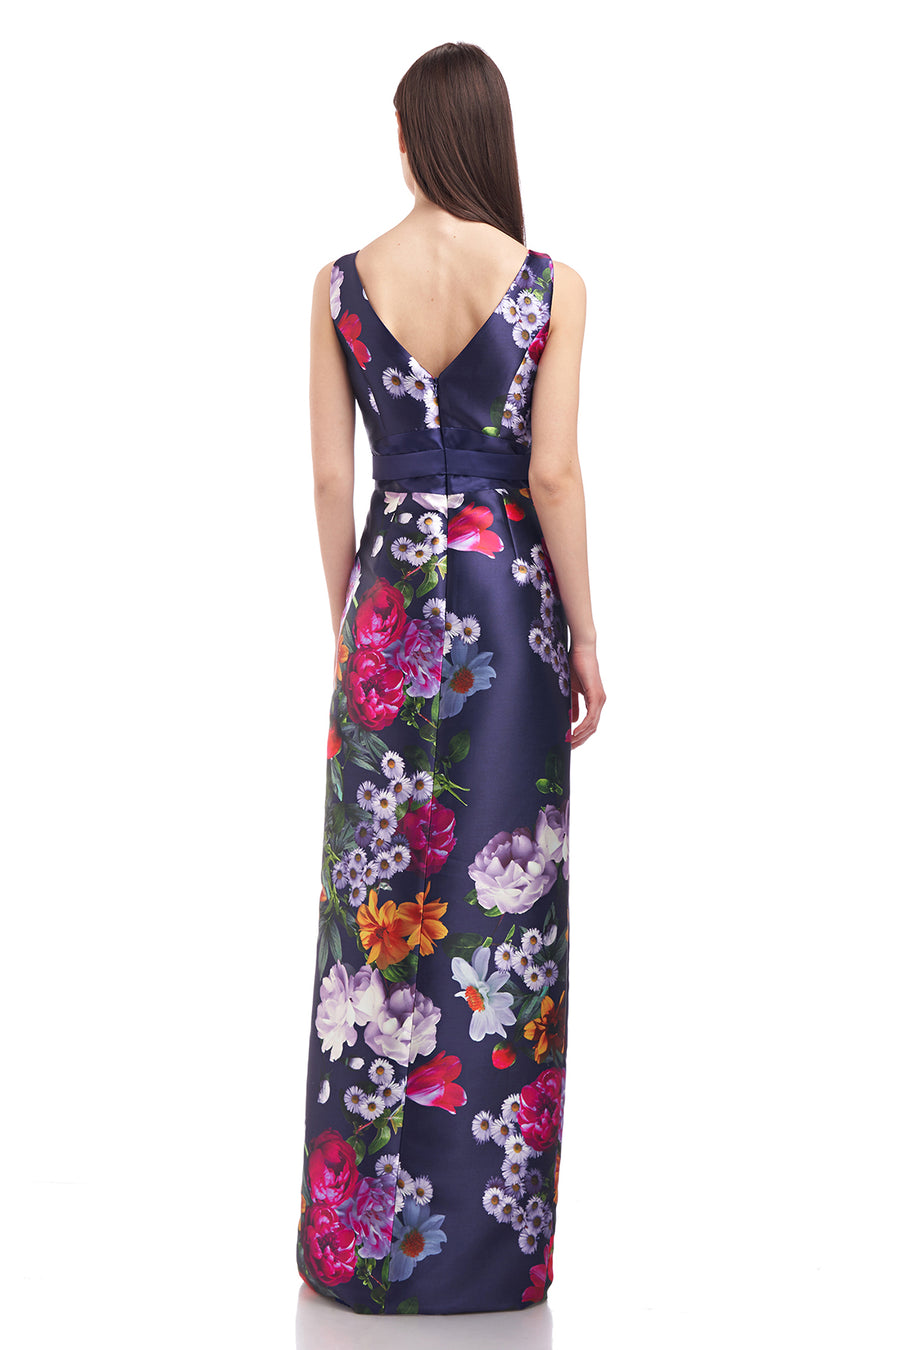 Kay Unger - Carina Column Gown - Midnight Peony Bouquet